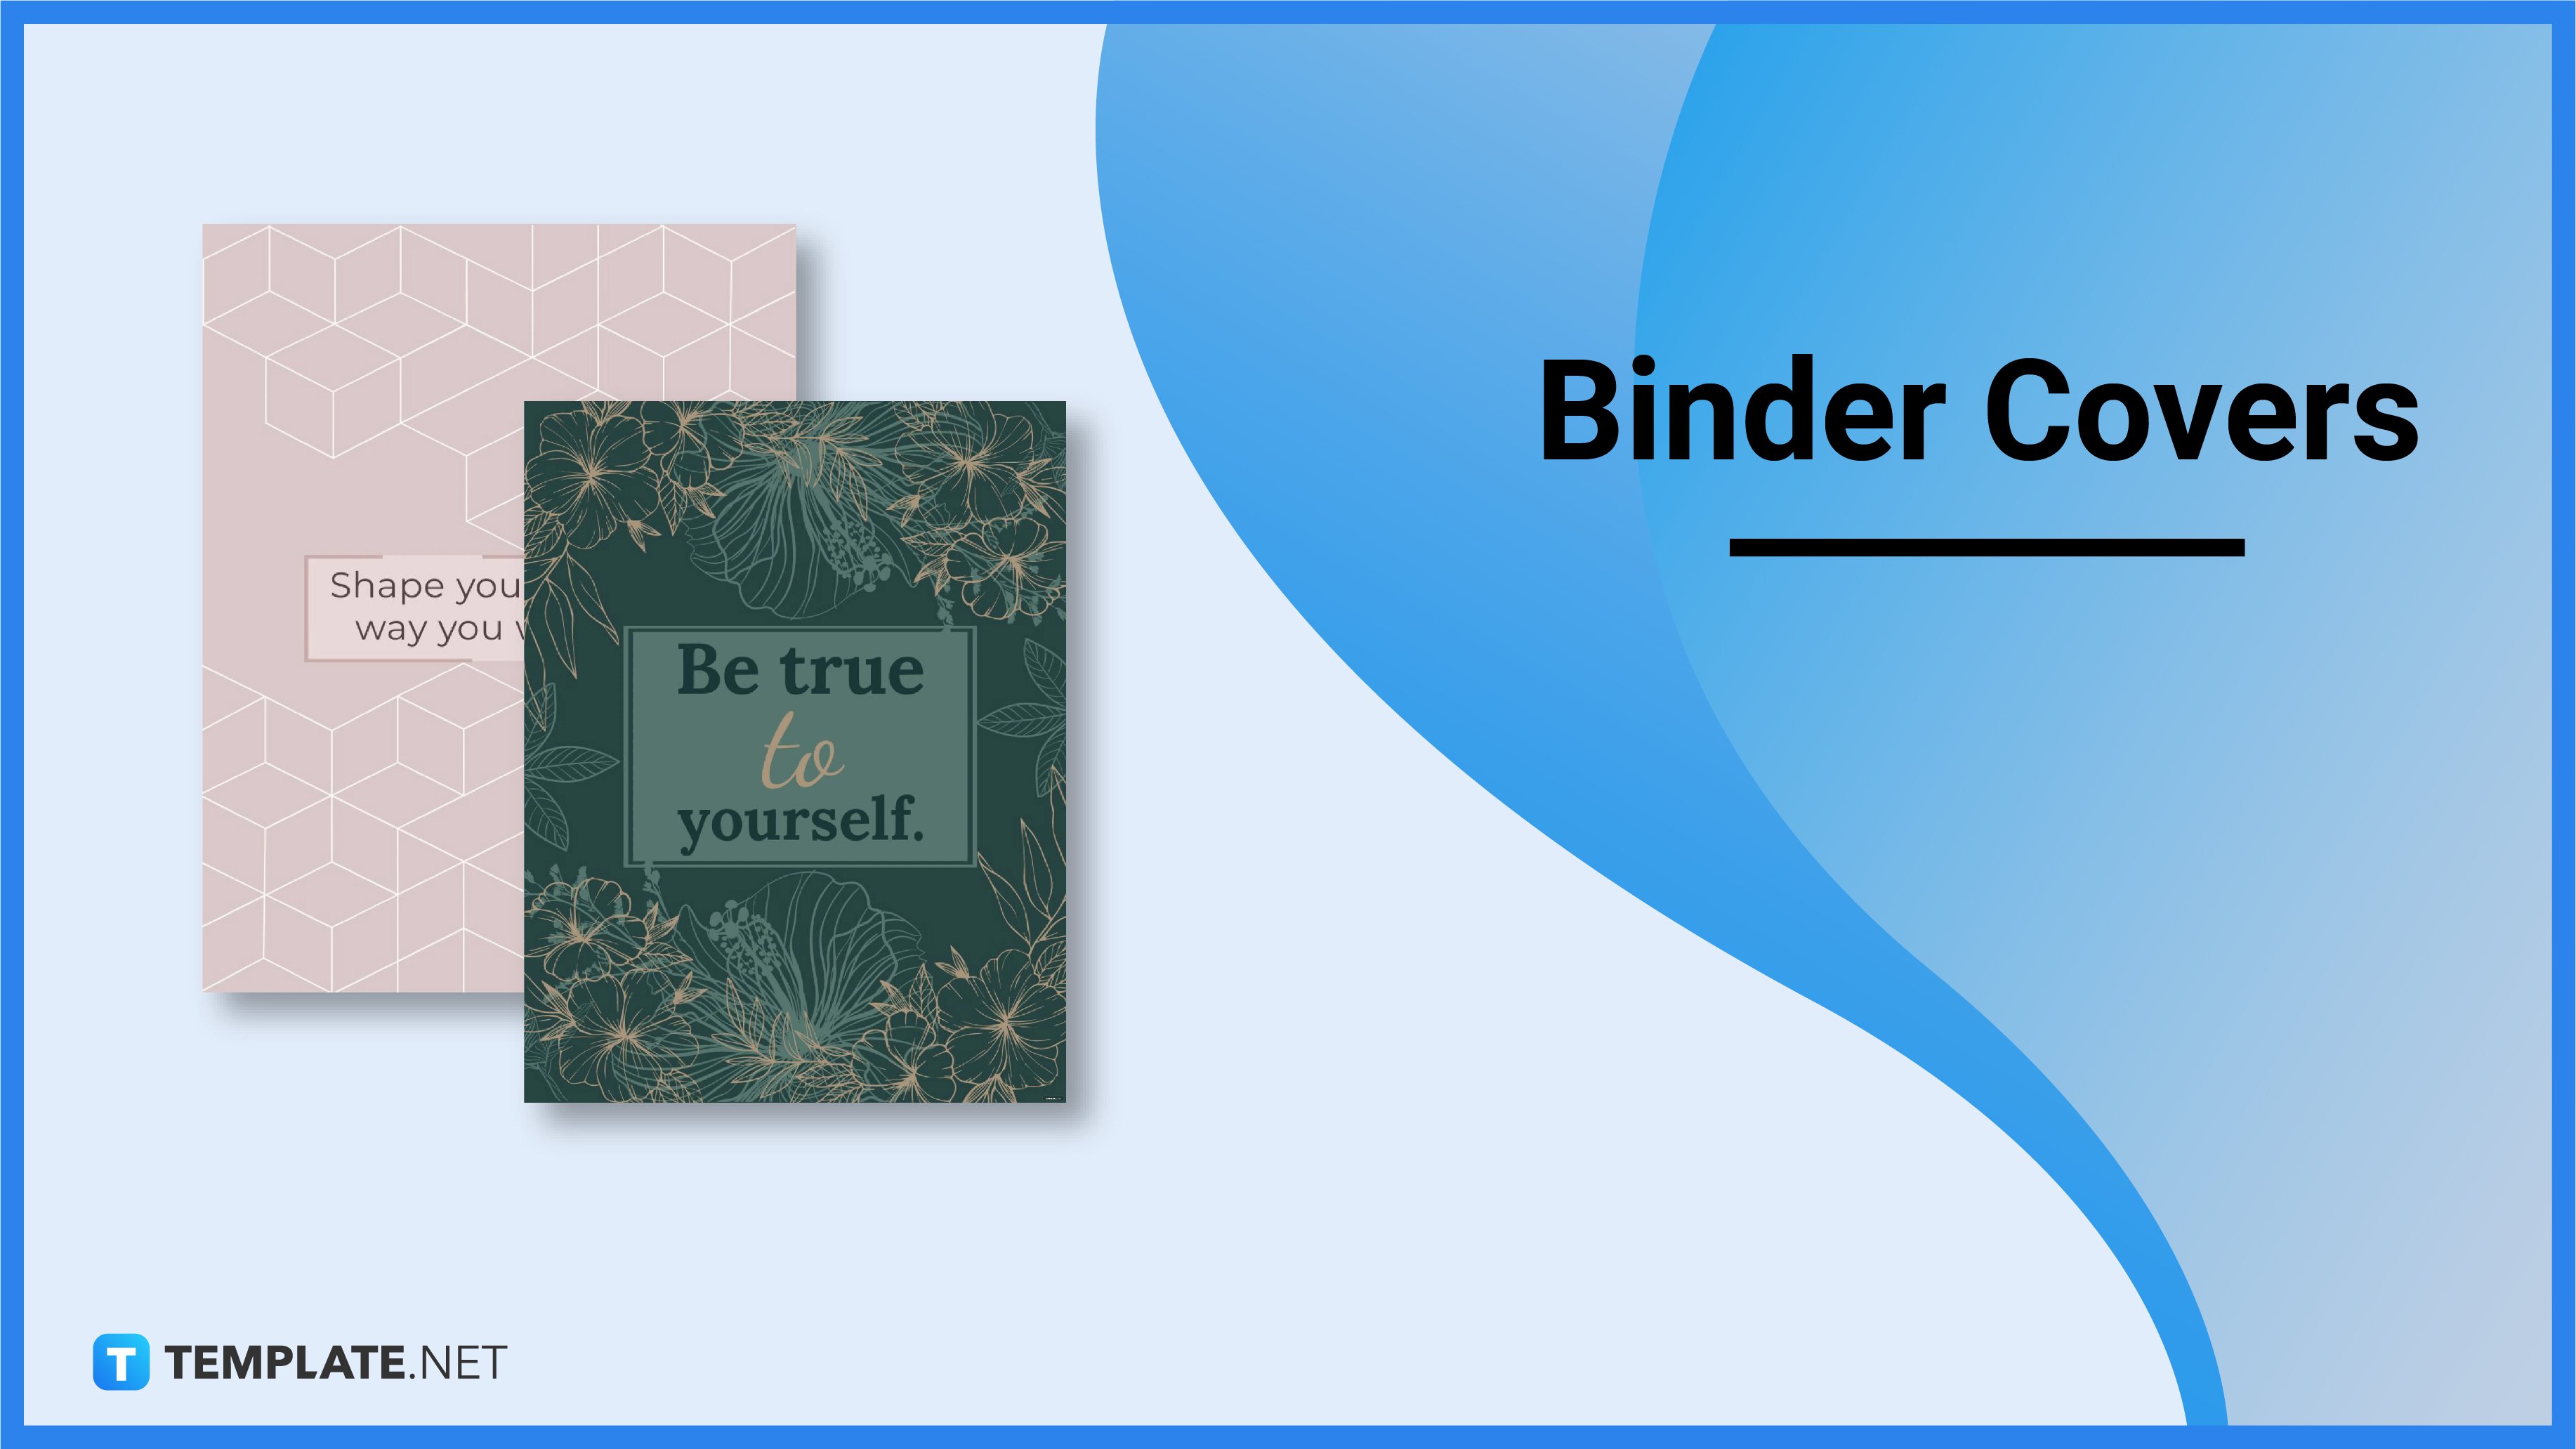 Binder Cover - What Is a Binder Cover? Definition, Types, Uses